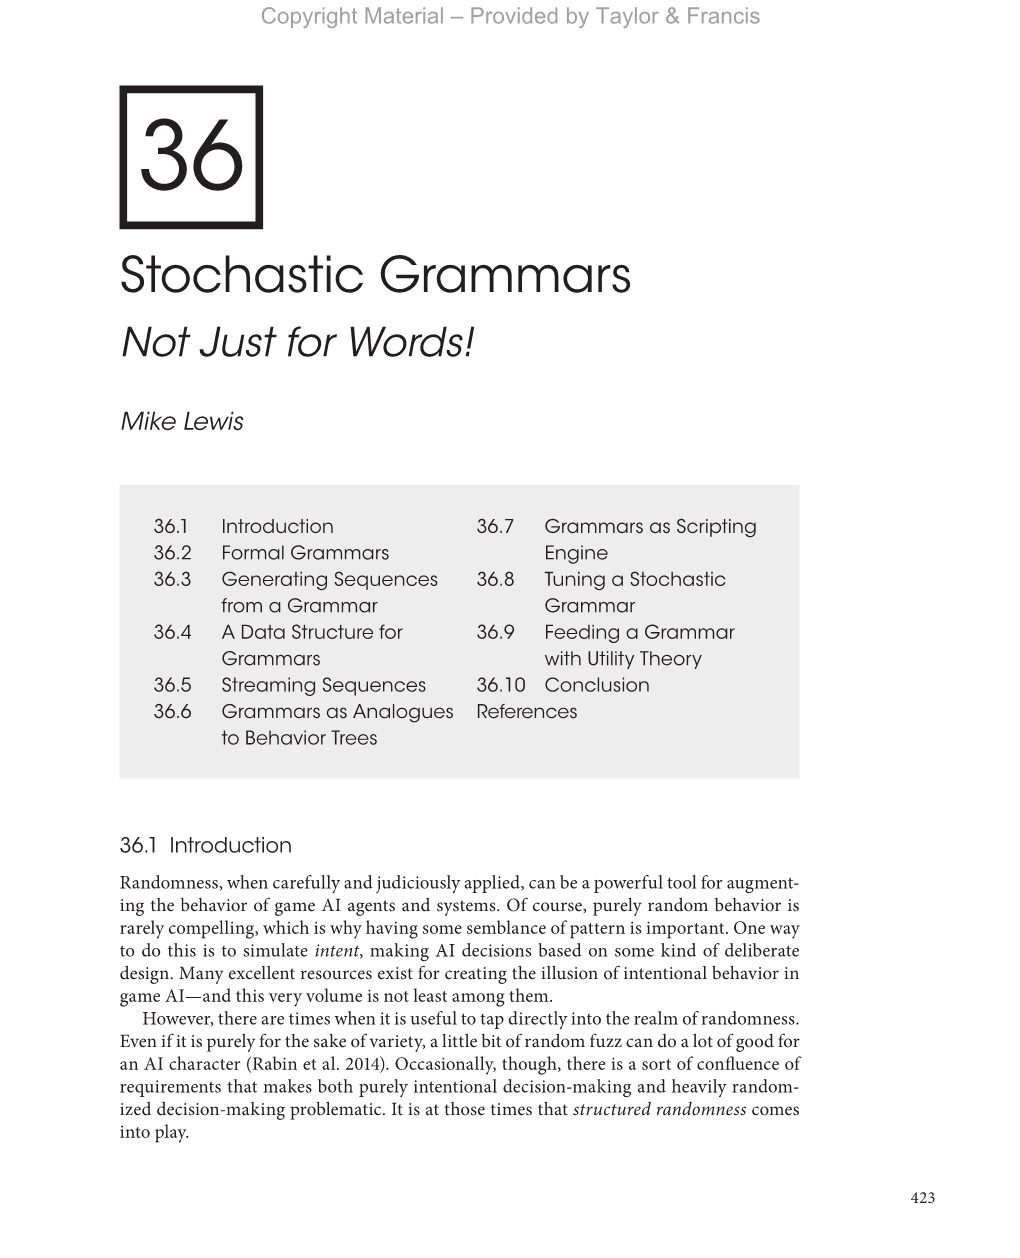 Stochastic Grammars Not Just for Words!